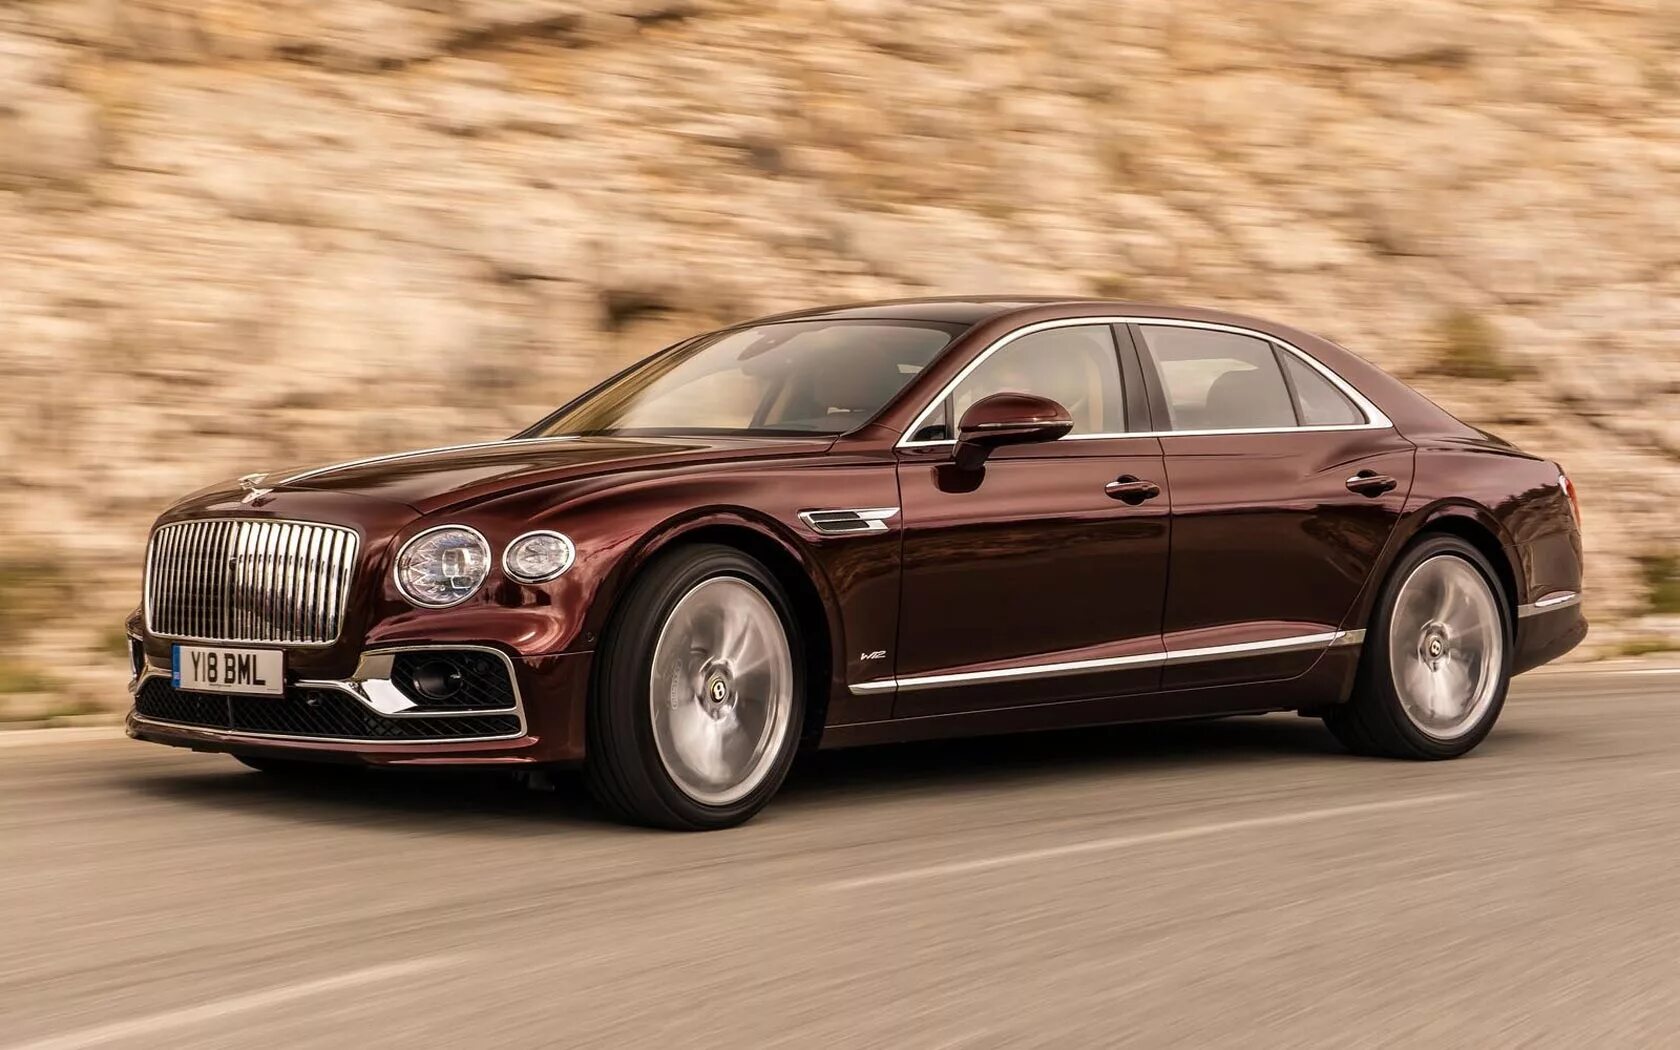 Бентли flying spur. Bentley Flying Spur 2020. Bentley Continental Flying Spur 2020. Bentley Flying Spur w12 2021. Bentley Continental Flying Spur 2014.